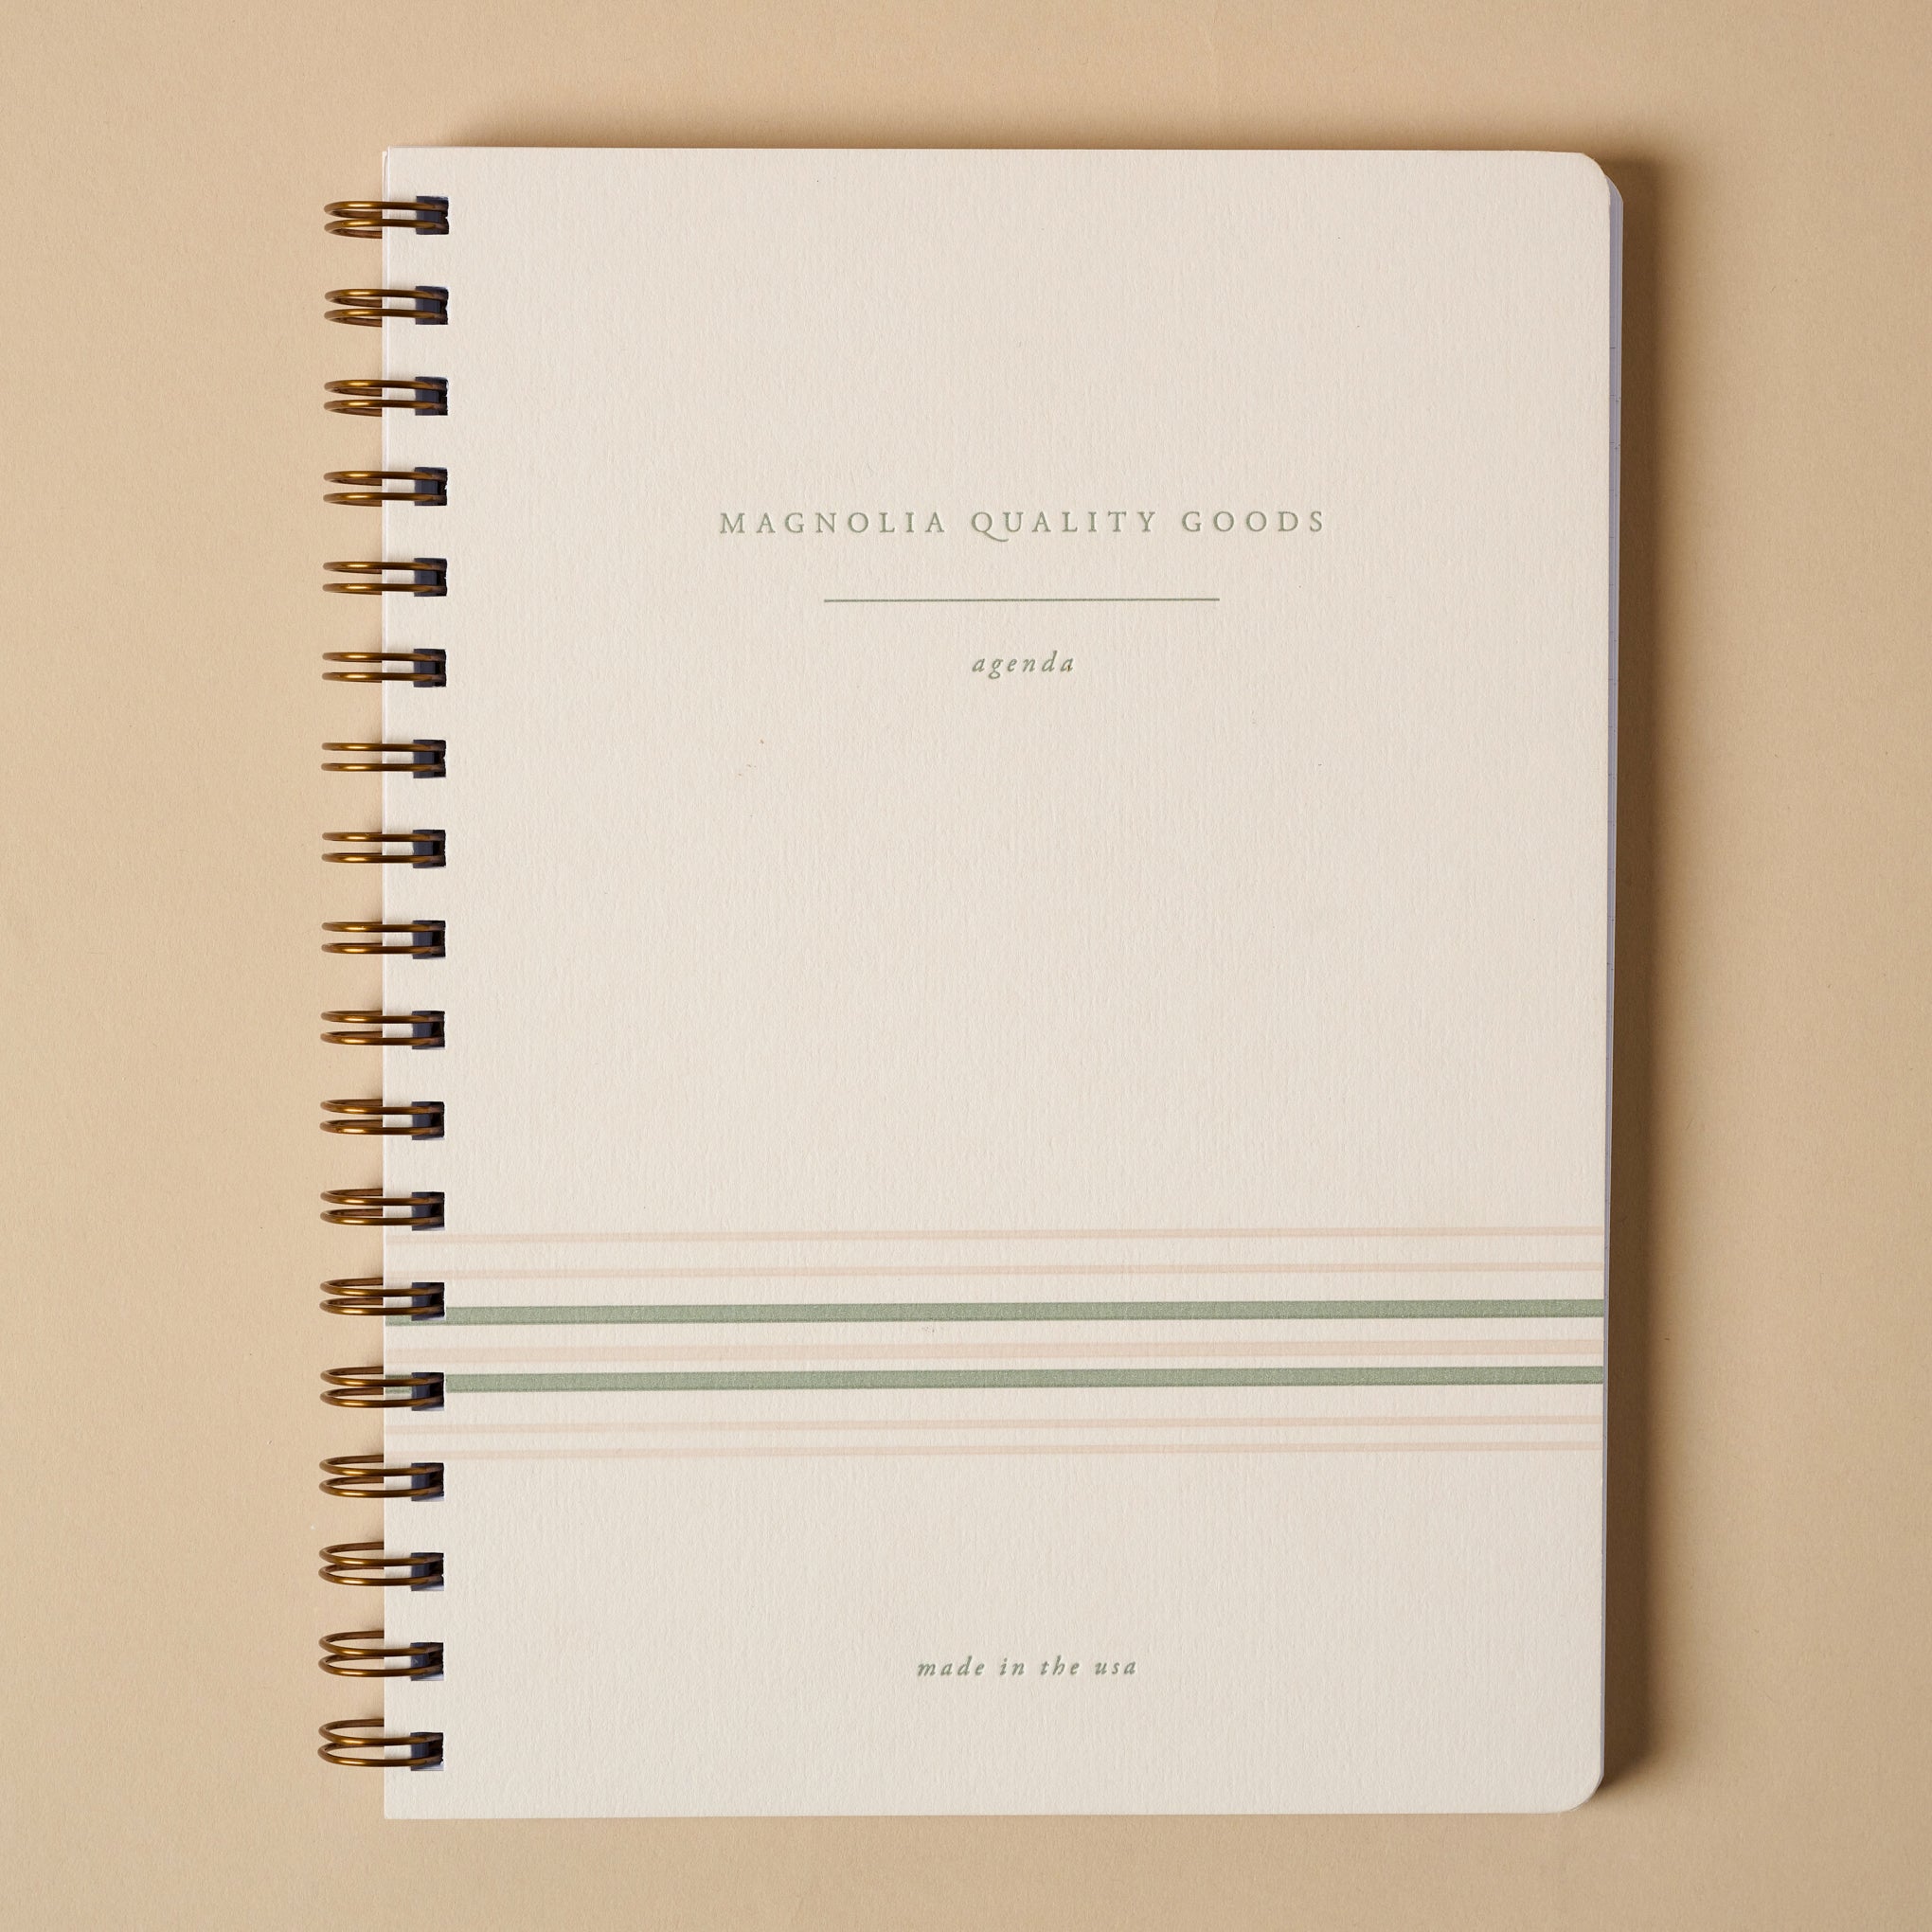 Magnolia Spiral Planner On sale for $25.50, discounted from $34.00